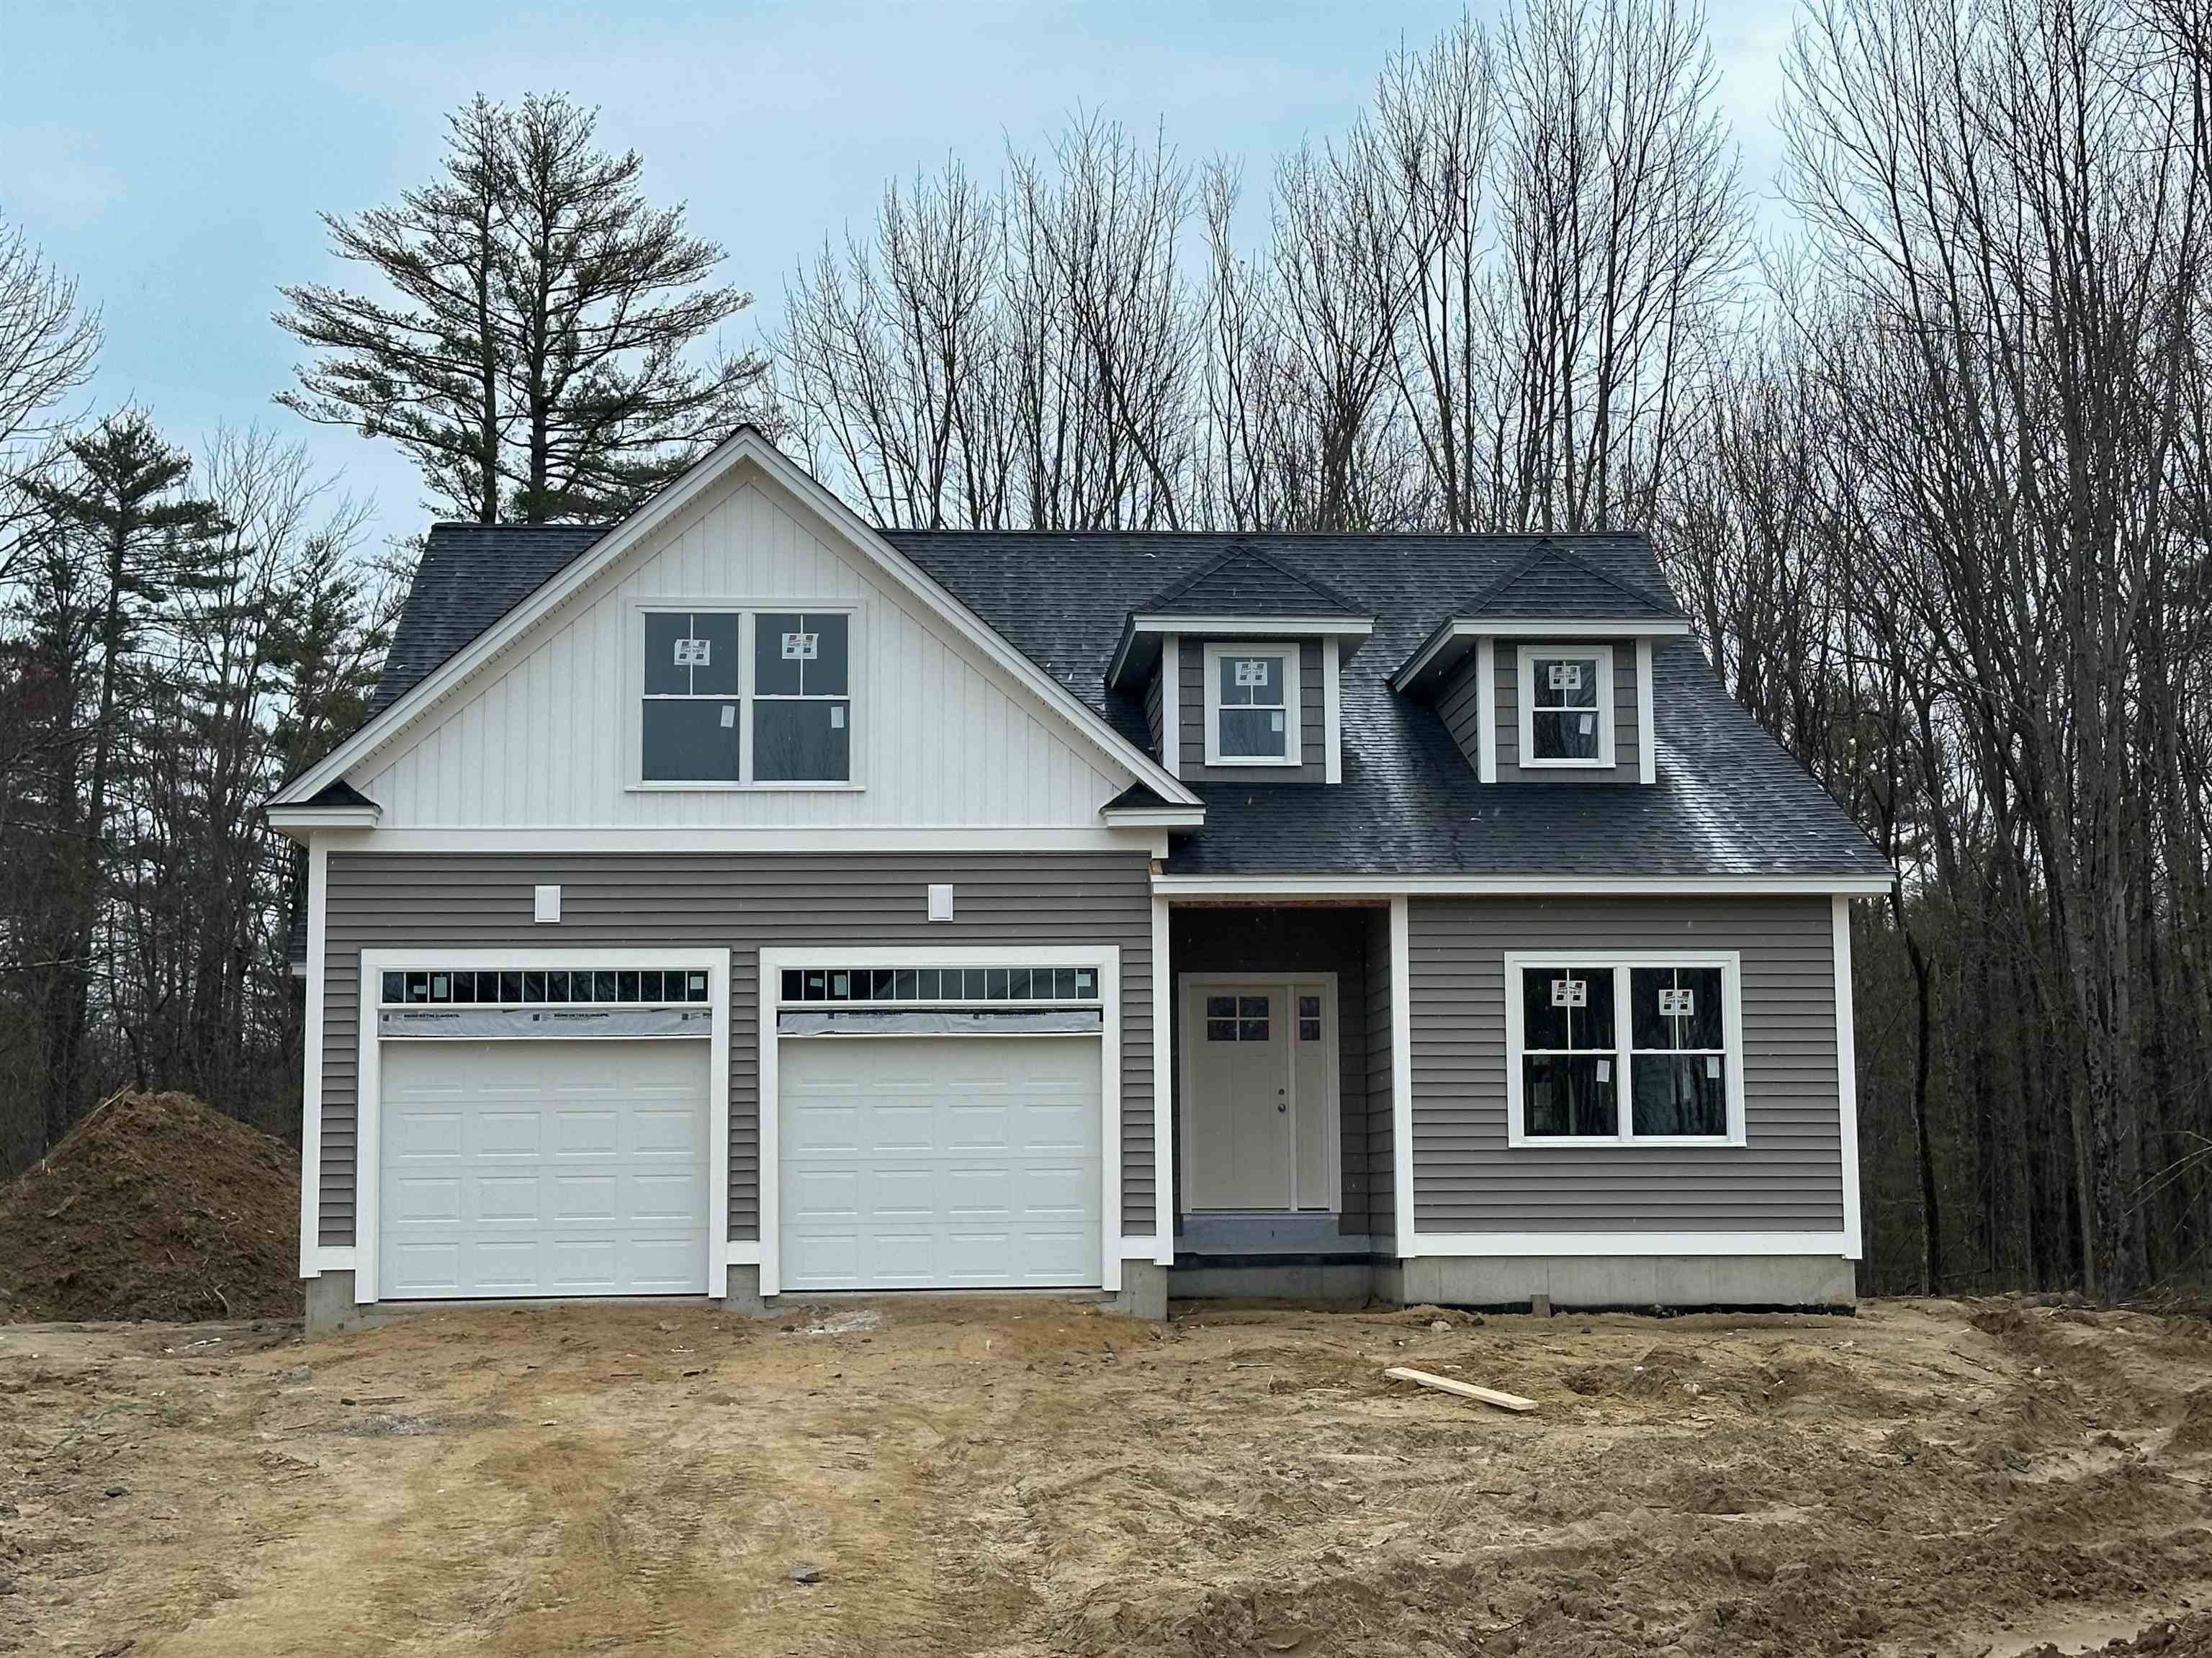 Lot 24 Stonearch At Greenhill. Barrington, NH 03825